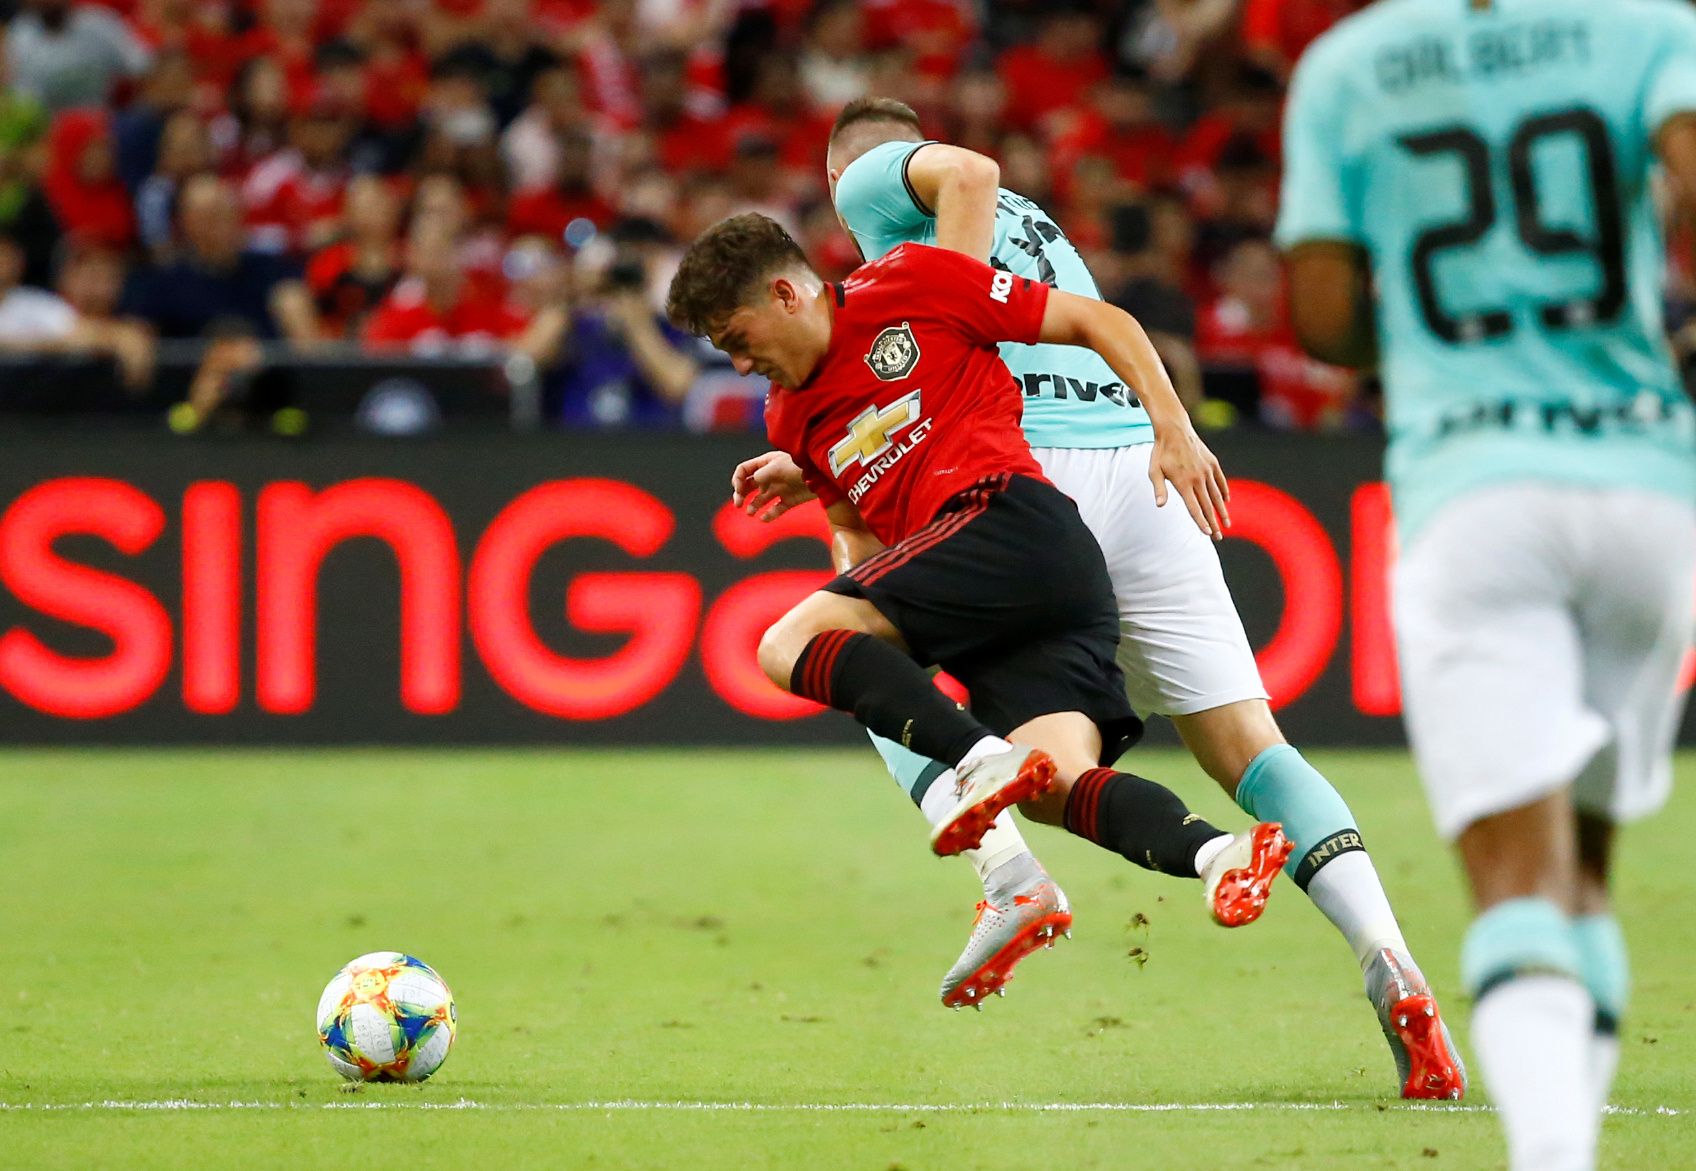 Soccer Football - International Champions Cup - Manchester United v Inter Milan - Singapore National Stadium, Singapore - July 20, 2019  Manchester United's Daniel James in action with Inter Milan's Milan Skriniar  REUTERS/Feline Lim